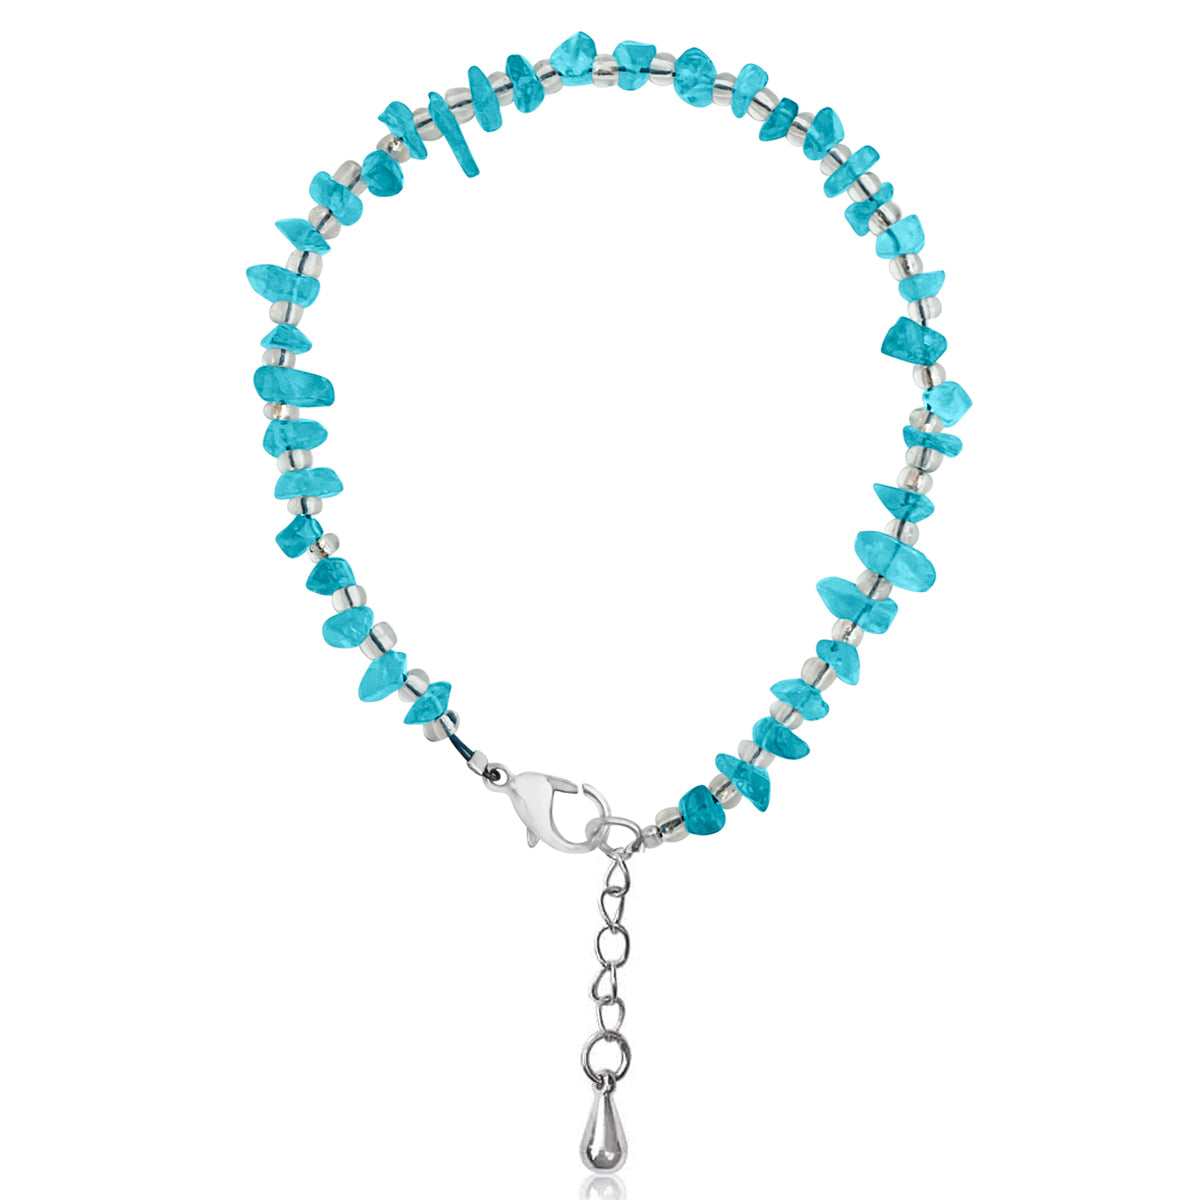 Apatite Bracelet for Healthy Habits - Best Healing Crystal Bracelet for Eating Disorders. Are you looking for crystals to help with eating disorders? The best crystals for anorexia, the best crystal for bulimia or the best crystal for eating disorders in general? APATITE is it. 